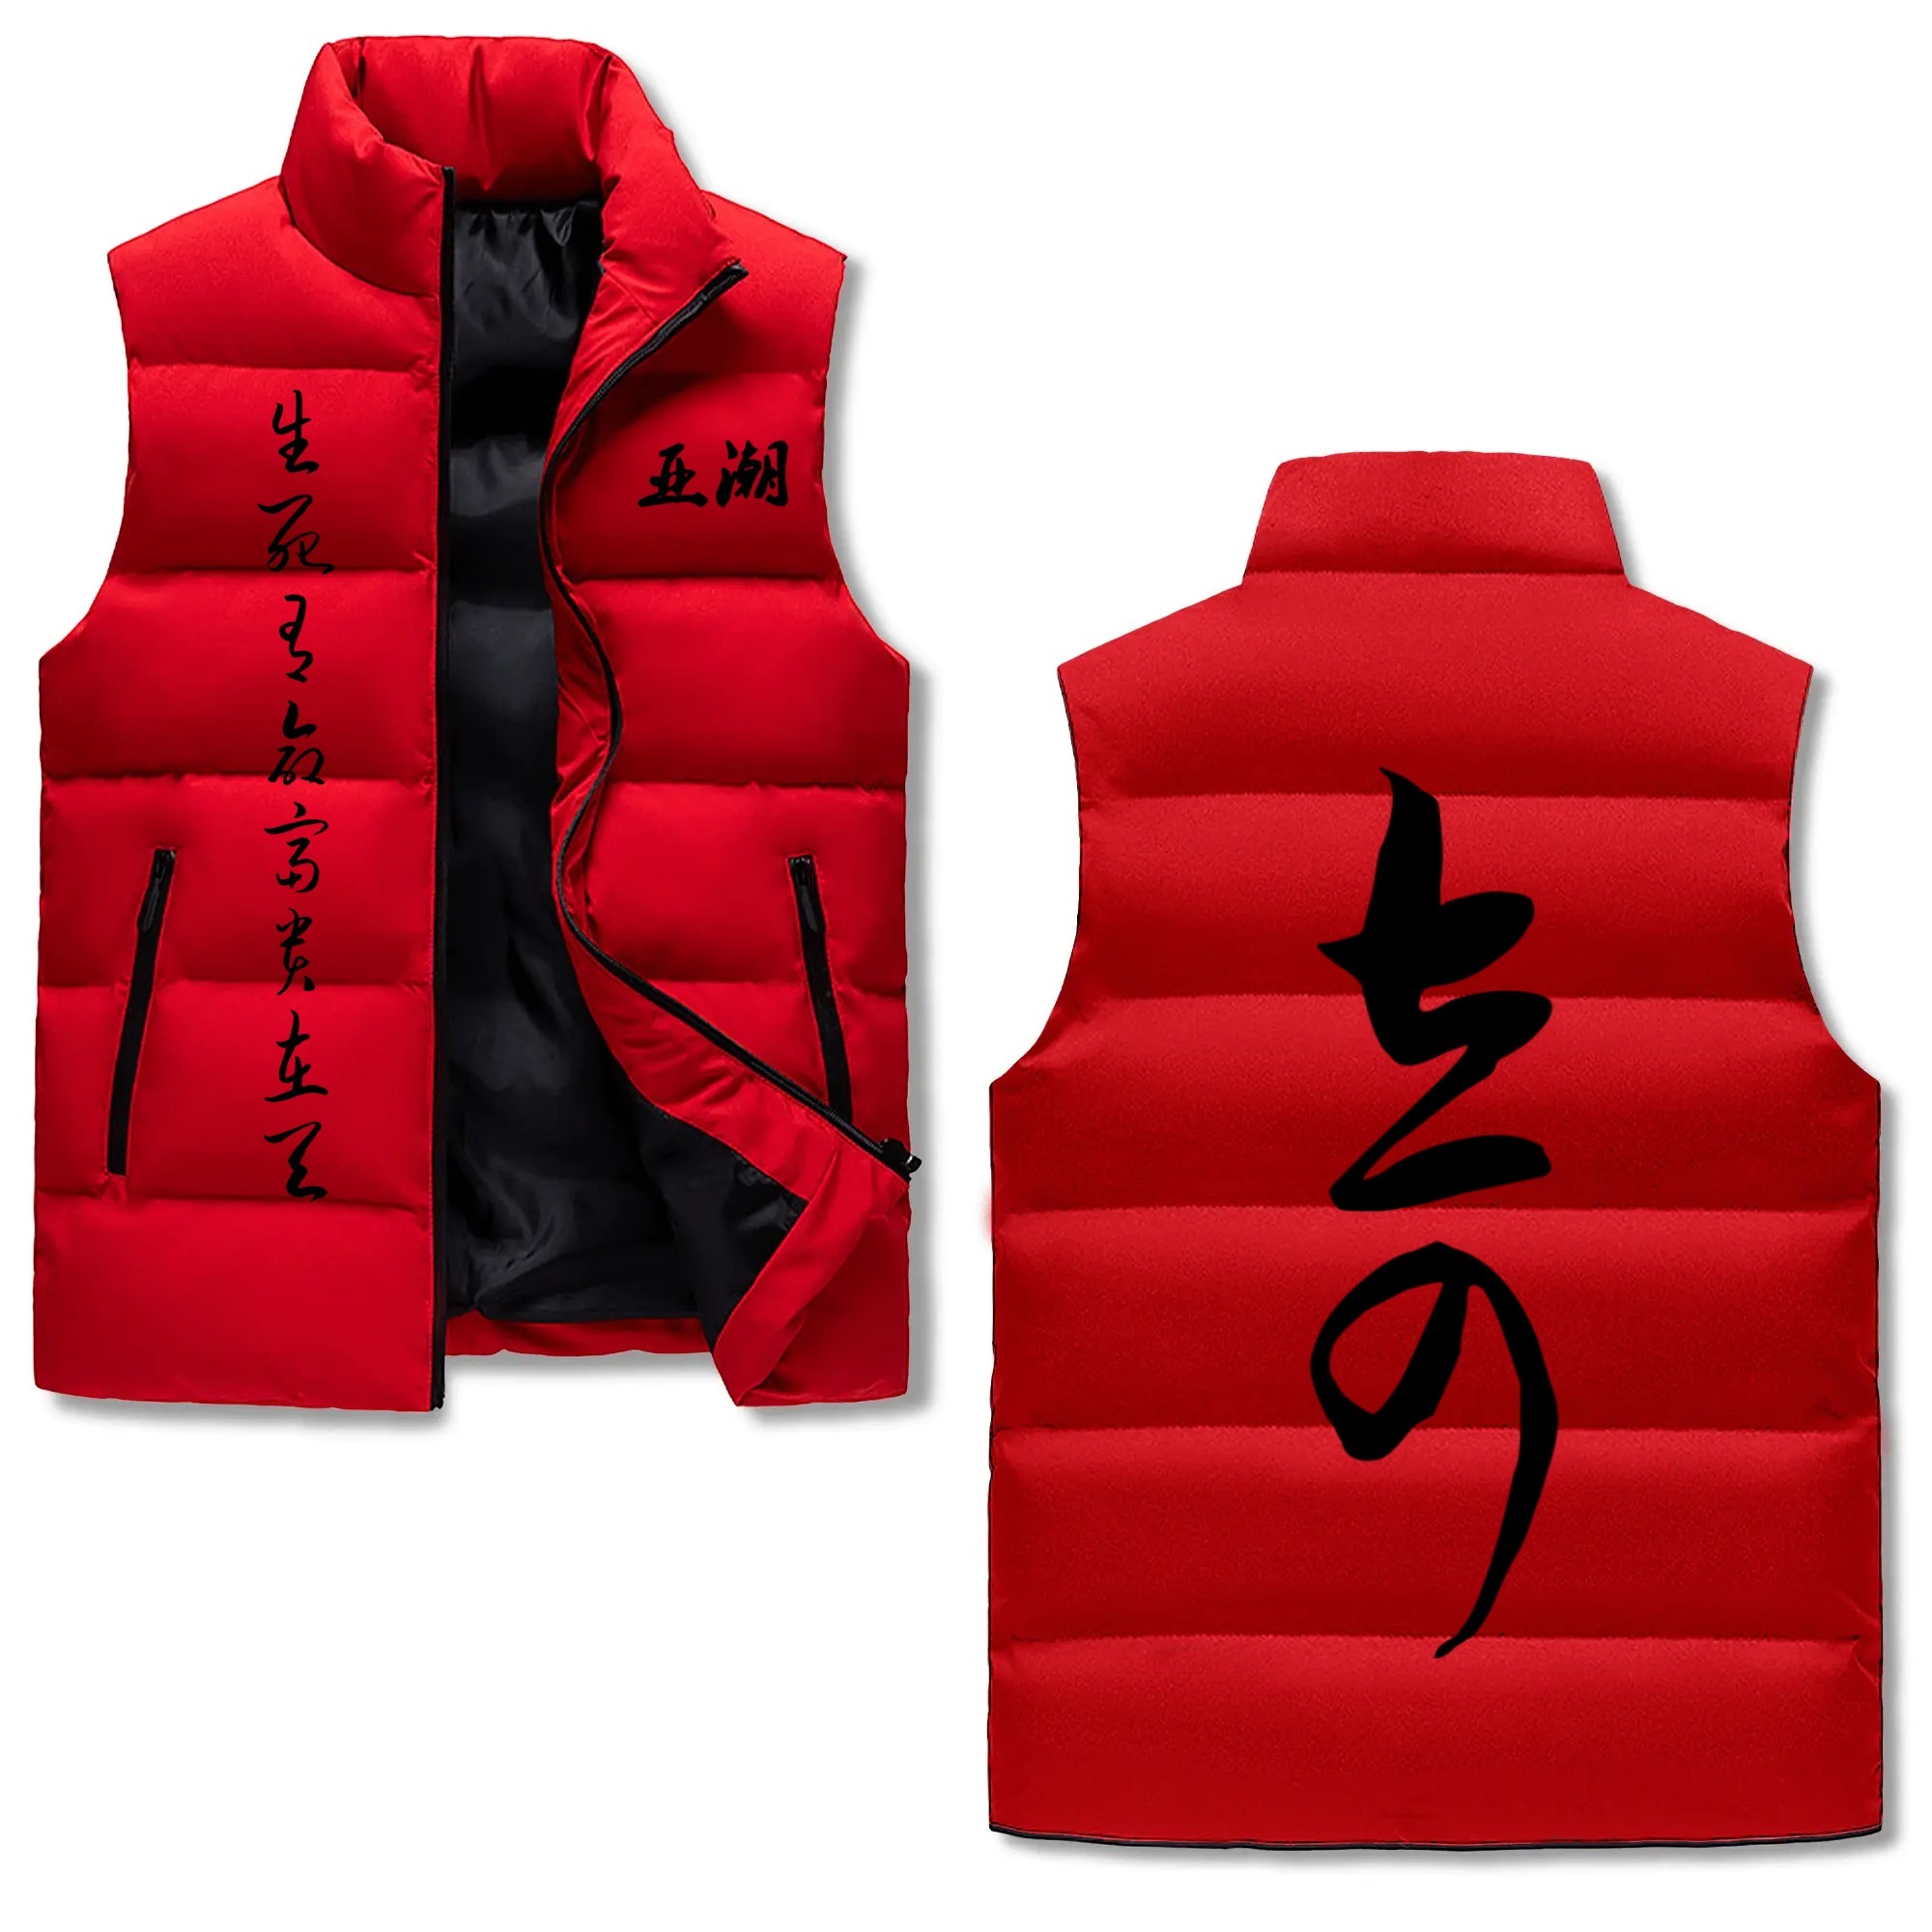 Puffer Vest - Astyle Kanji collection 亚潮 奇-AstyleStore